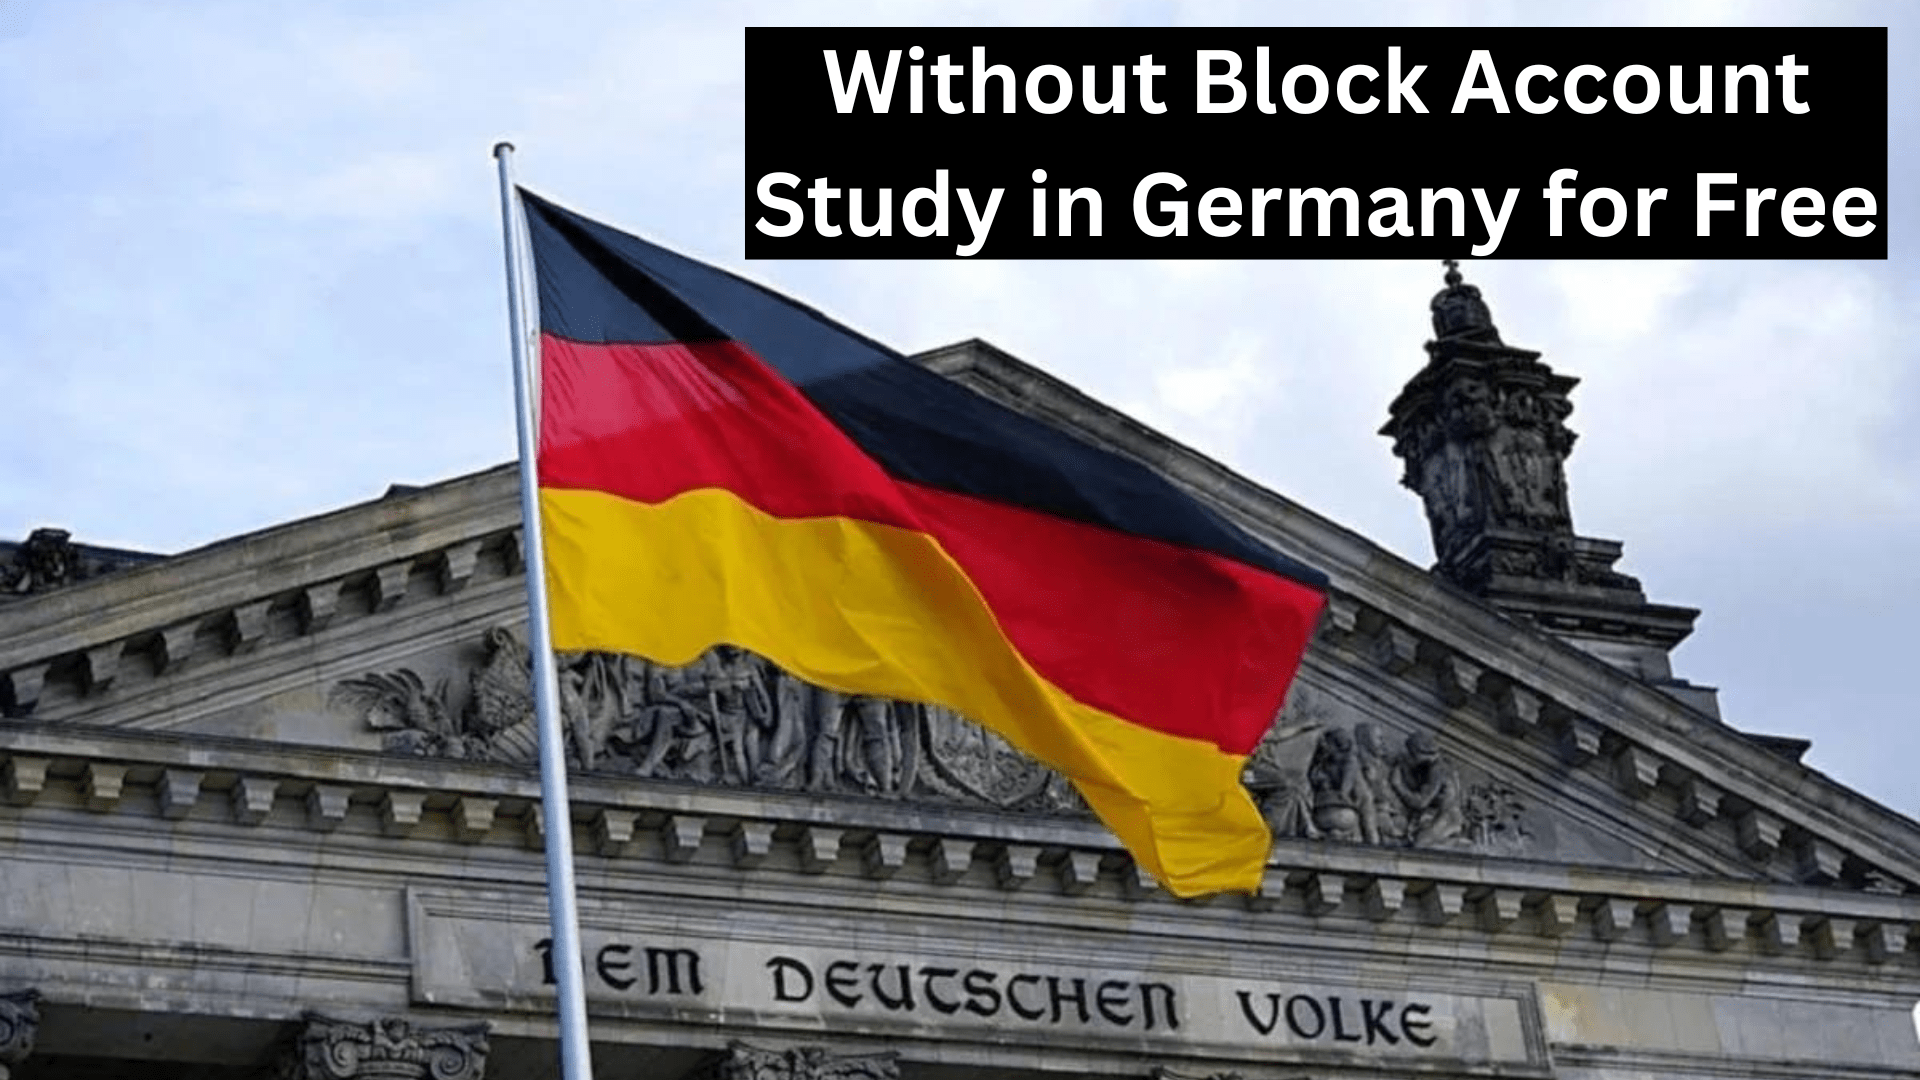 Study in Germany for Free